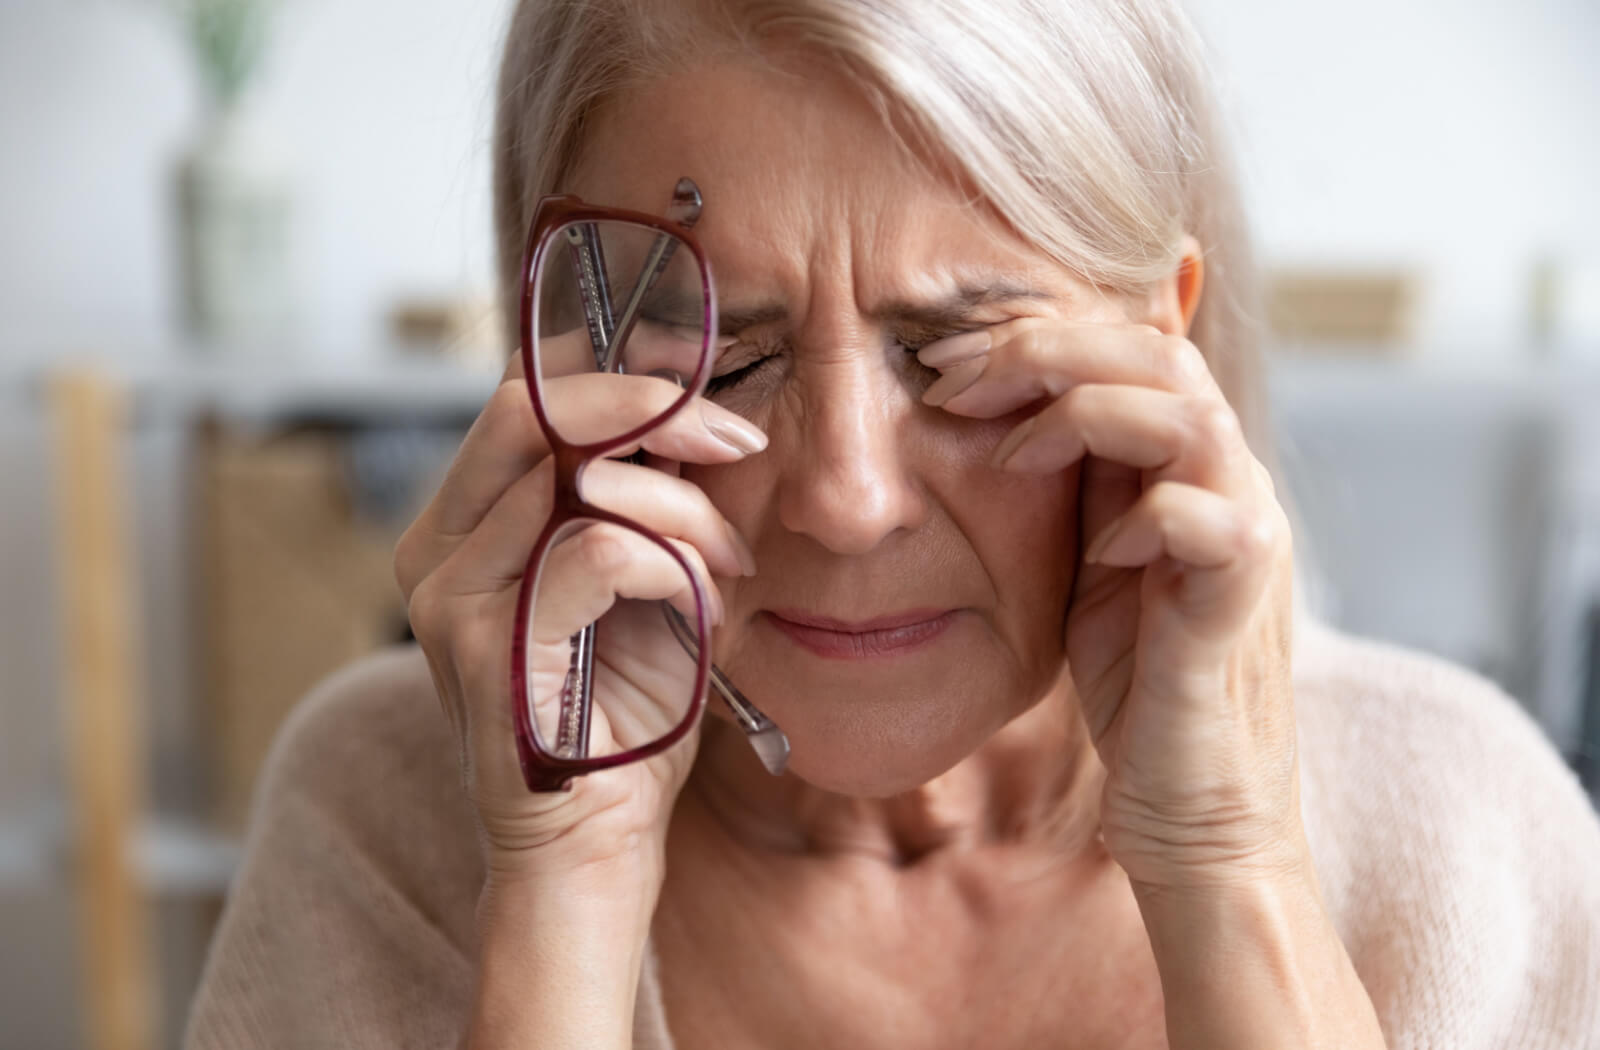 An older adult woman experiencing eye pain that is possibly caused by glaucoma.